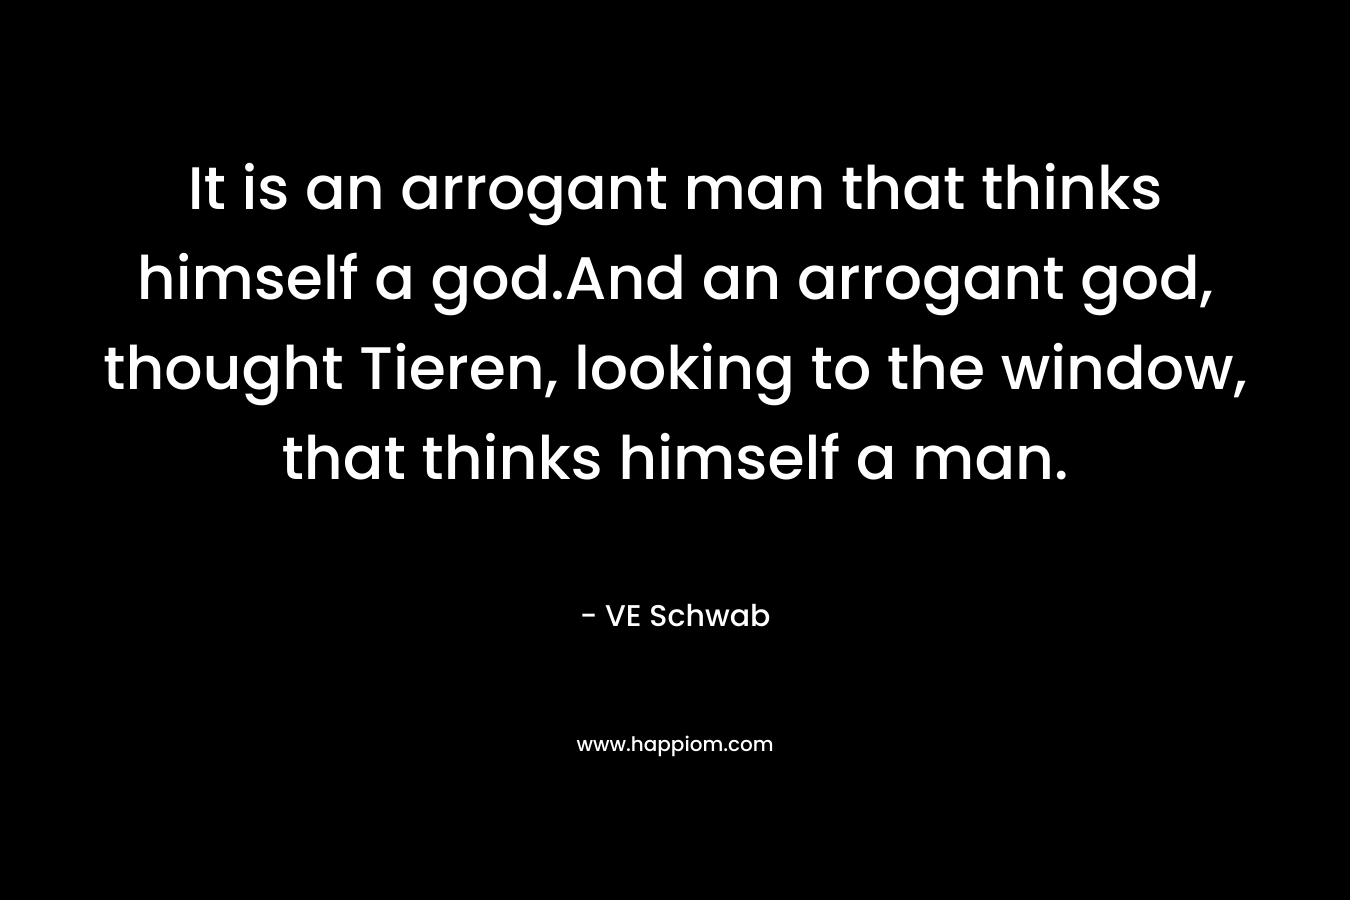 It is an arrogant man that thinks himself a god.And an arrogant god, thought Tieren, looking to the window, that thinks himself a man.